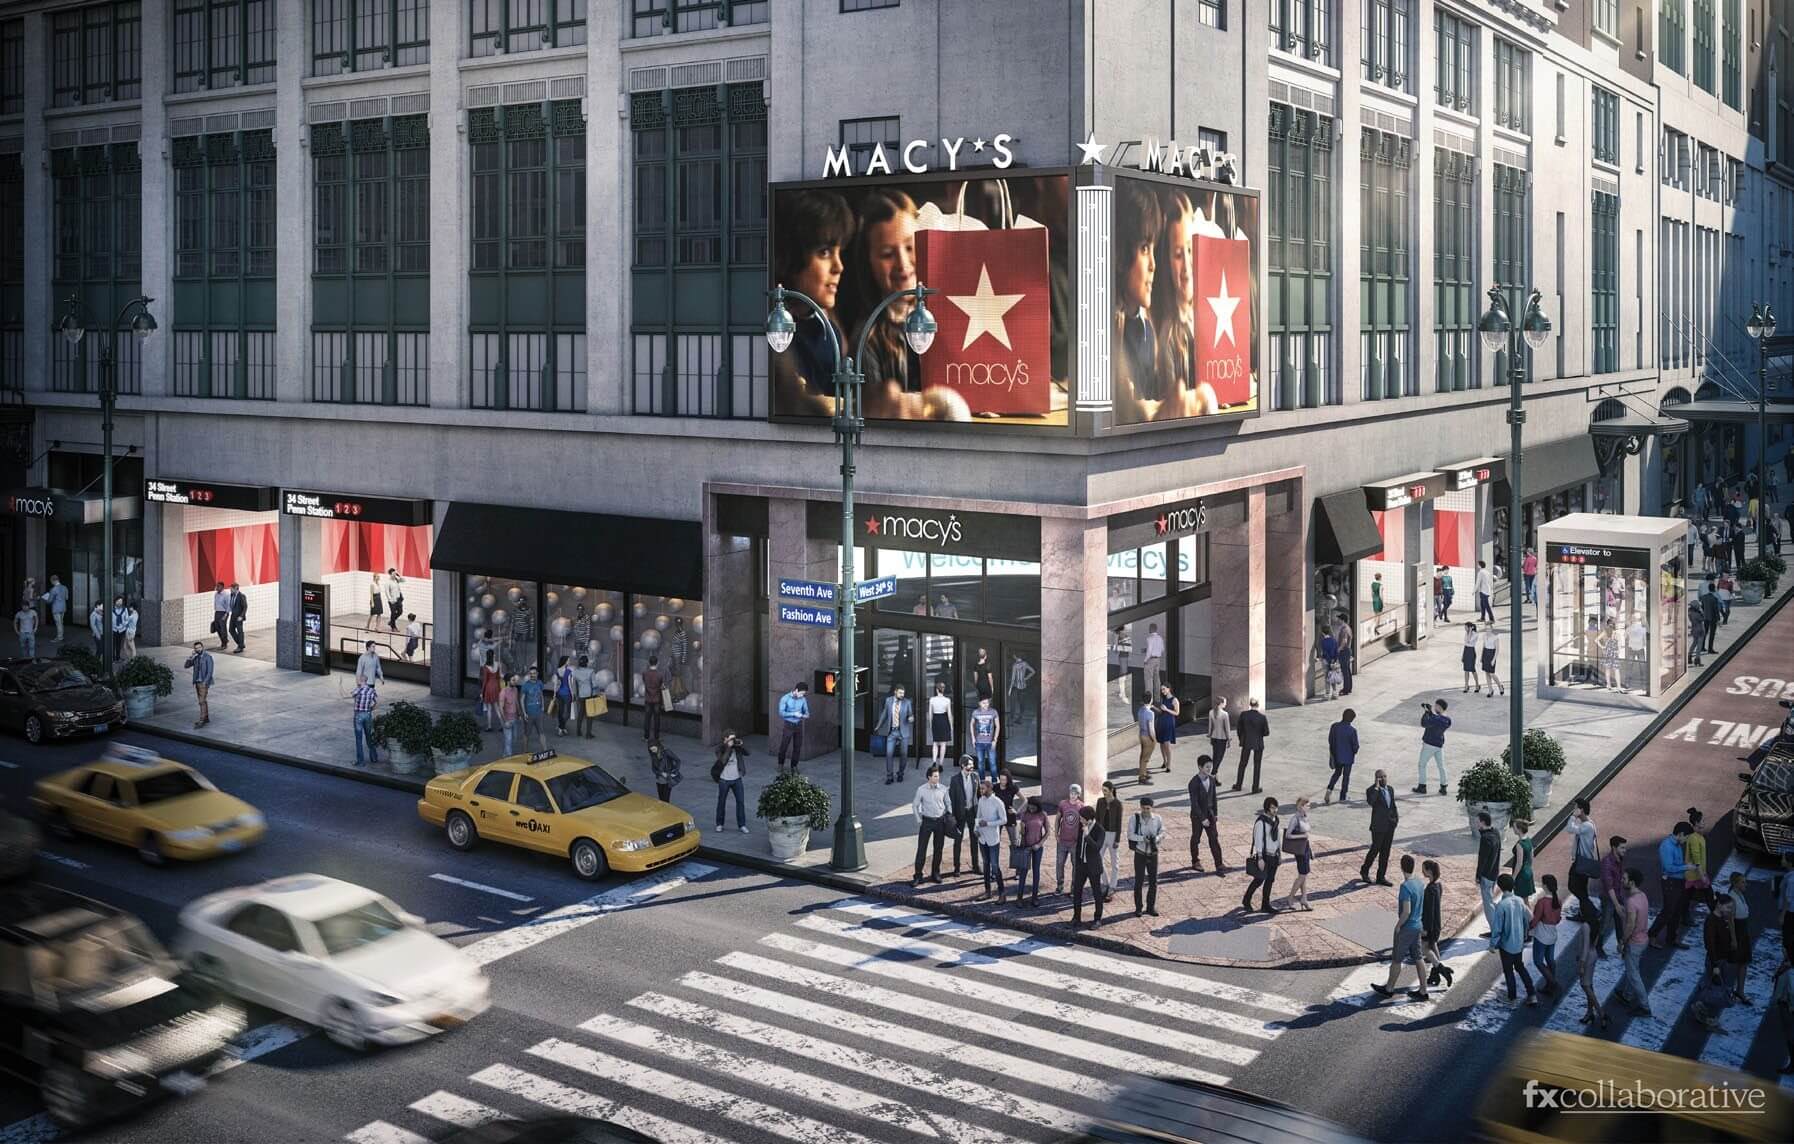 illustration depicting a revamped entrance to macy's department store